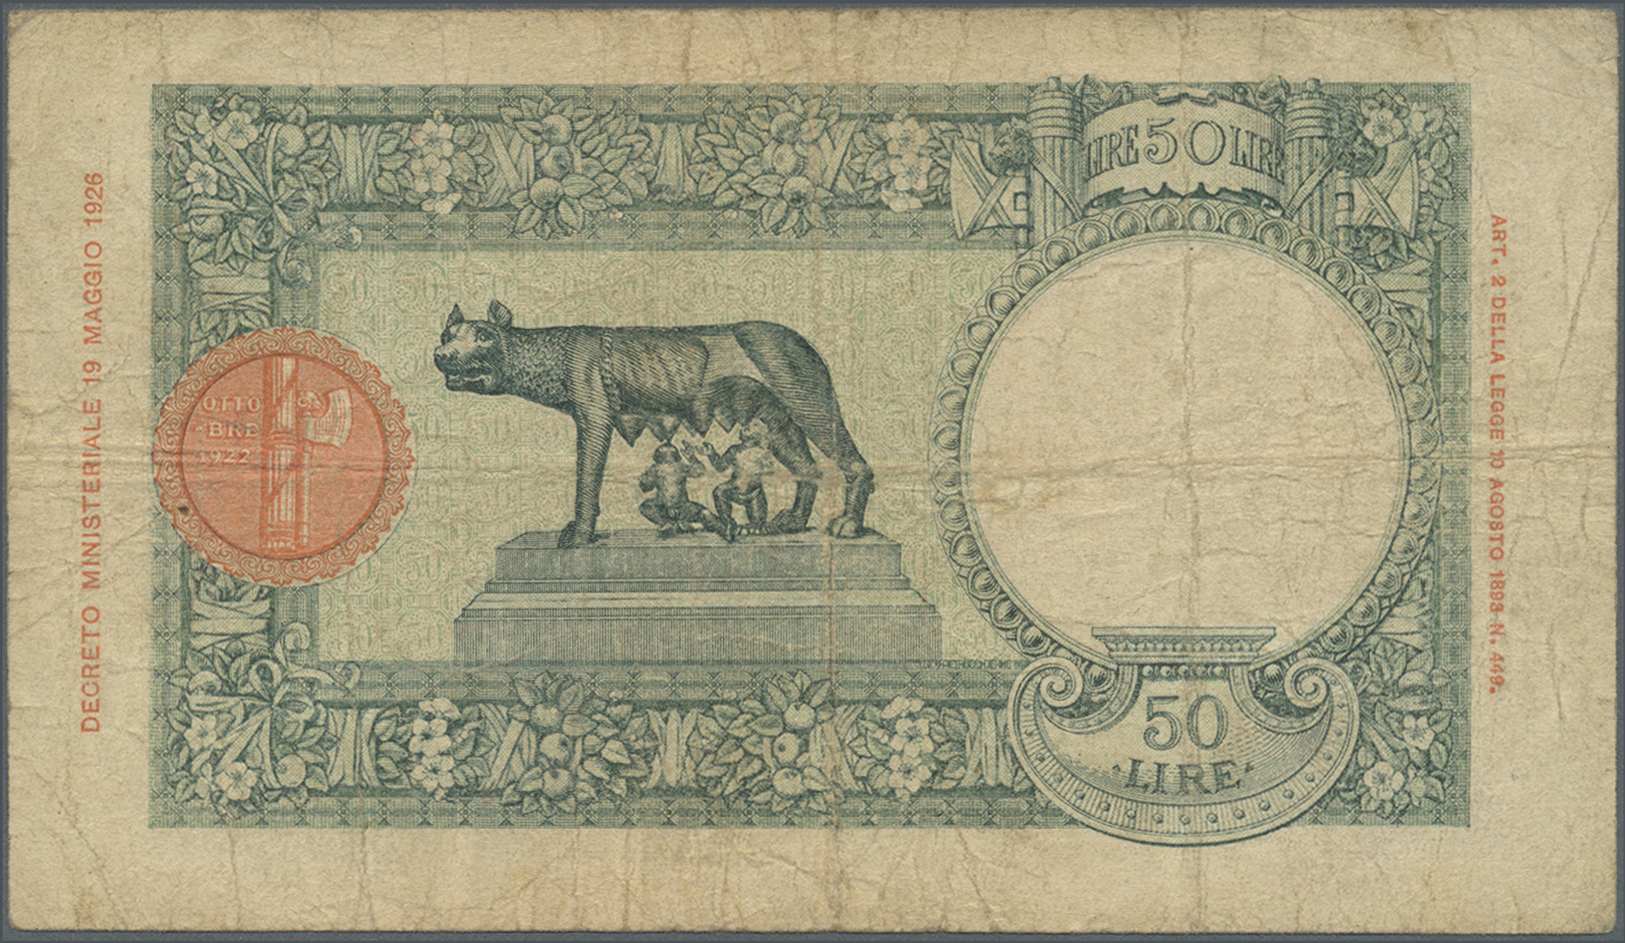 01255 Italian East Africa / Italienisch Ost-Afrika: 50 Lire 1938 P. 1a, Stronger Used With Folds And Stain, The Front An - Italian East Africa